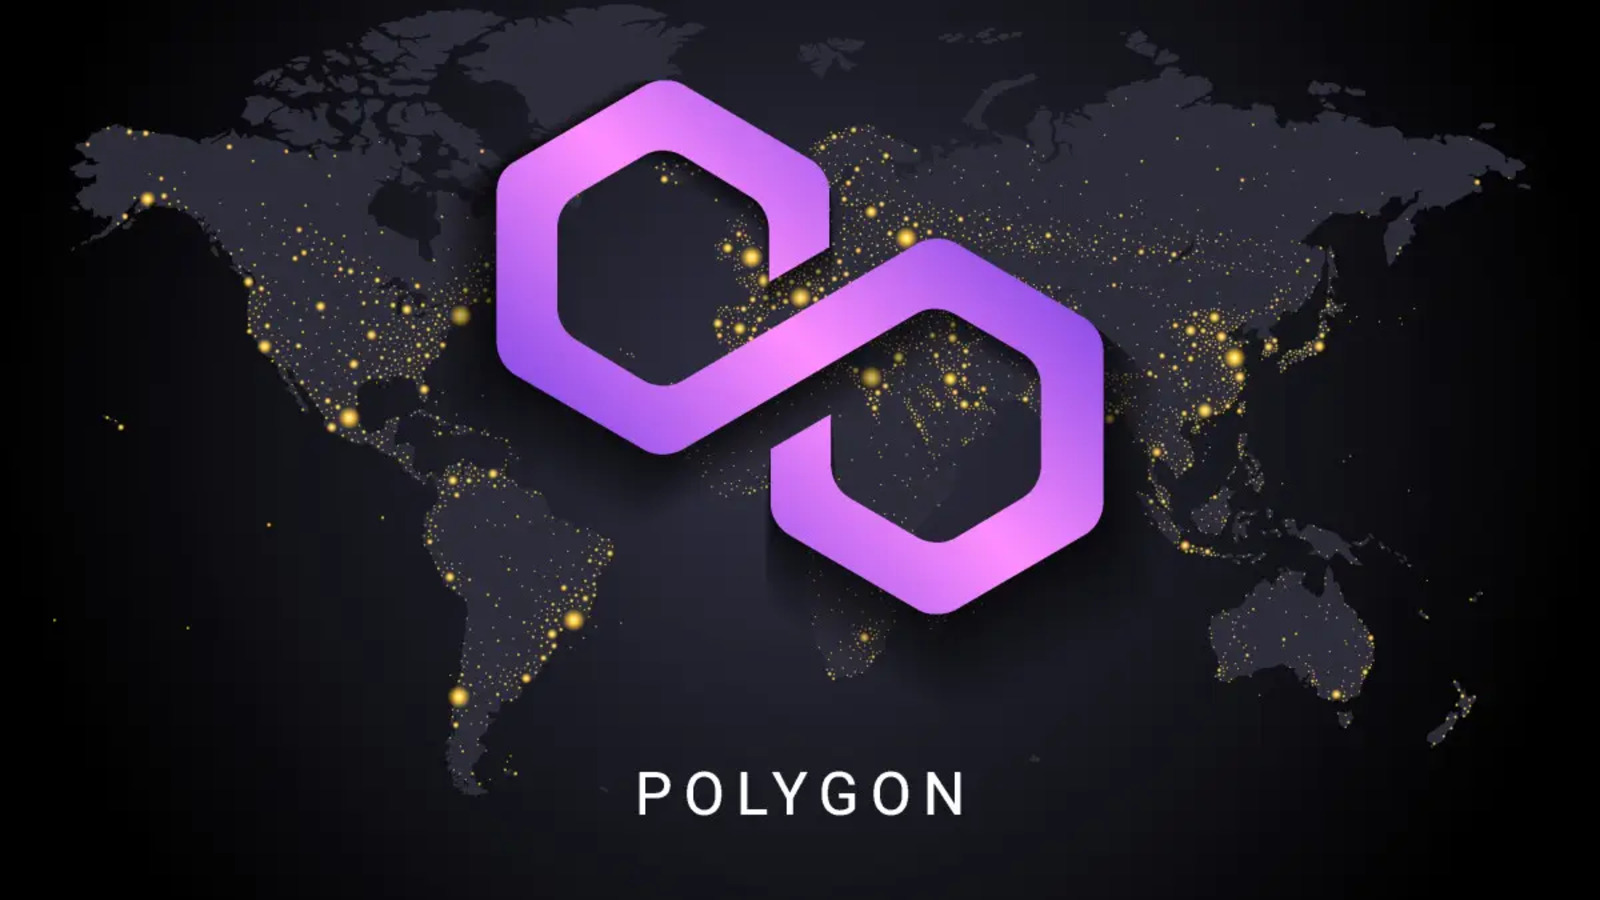 Polygon caught up in FTX contagion, while MATIC risks losing 90%